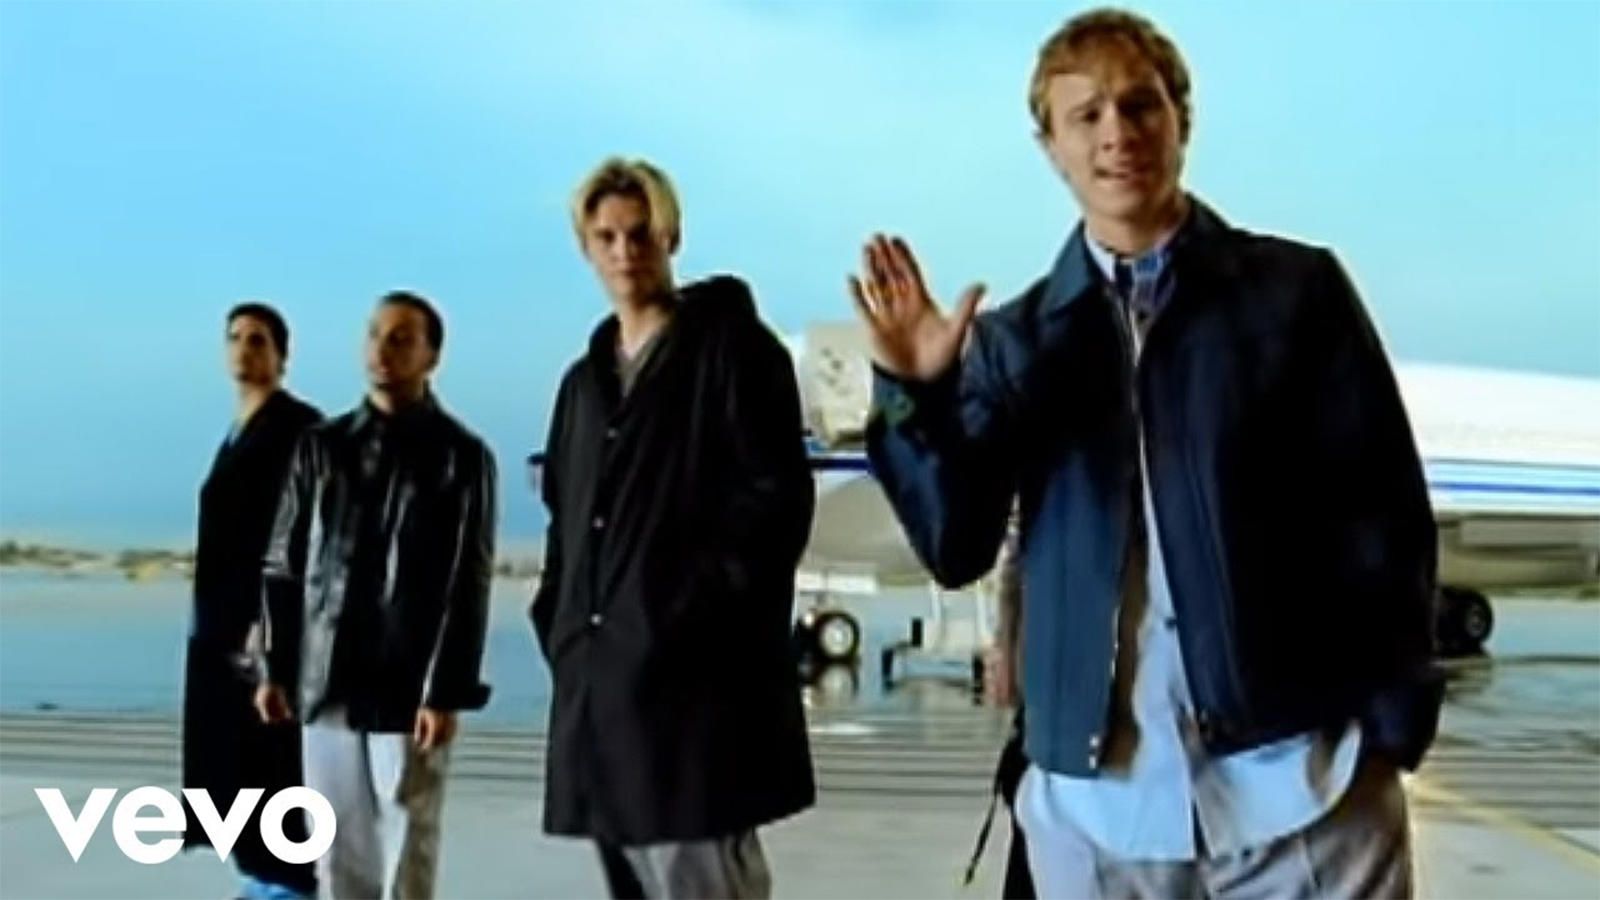 English Song 'I Want It That Way' Sung By Backstreet Boys